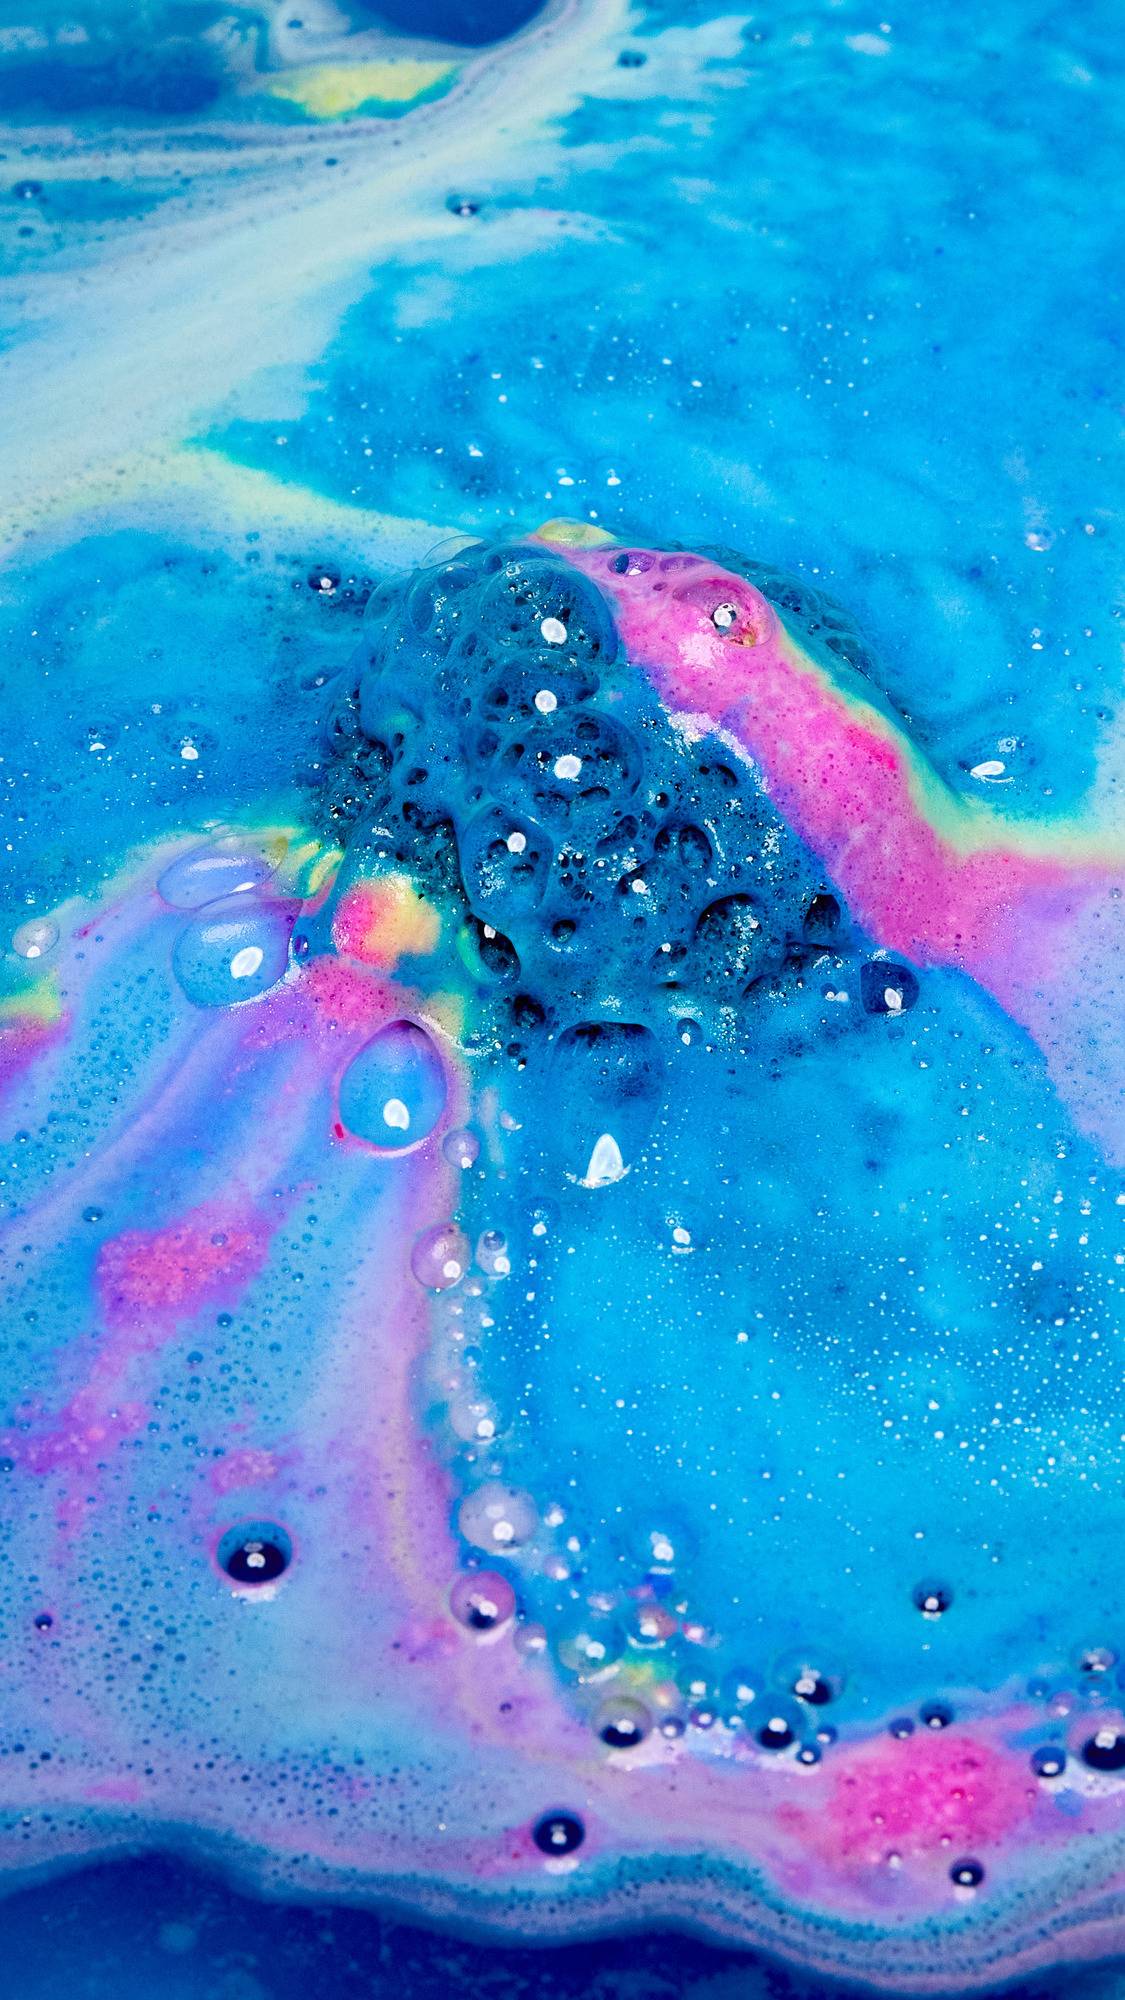 A close-up of the Giant Intergalactic bath bomb as it dissolves in the bath water releasing bright blue thick foam with flecks of pink and yellow. 